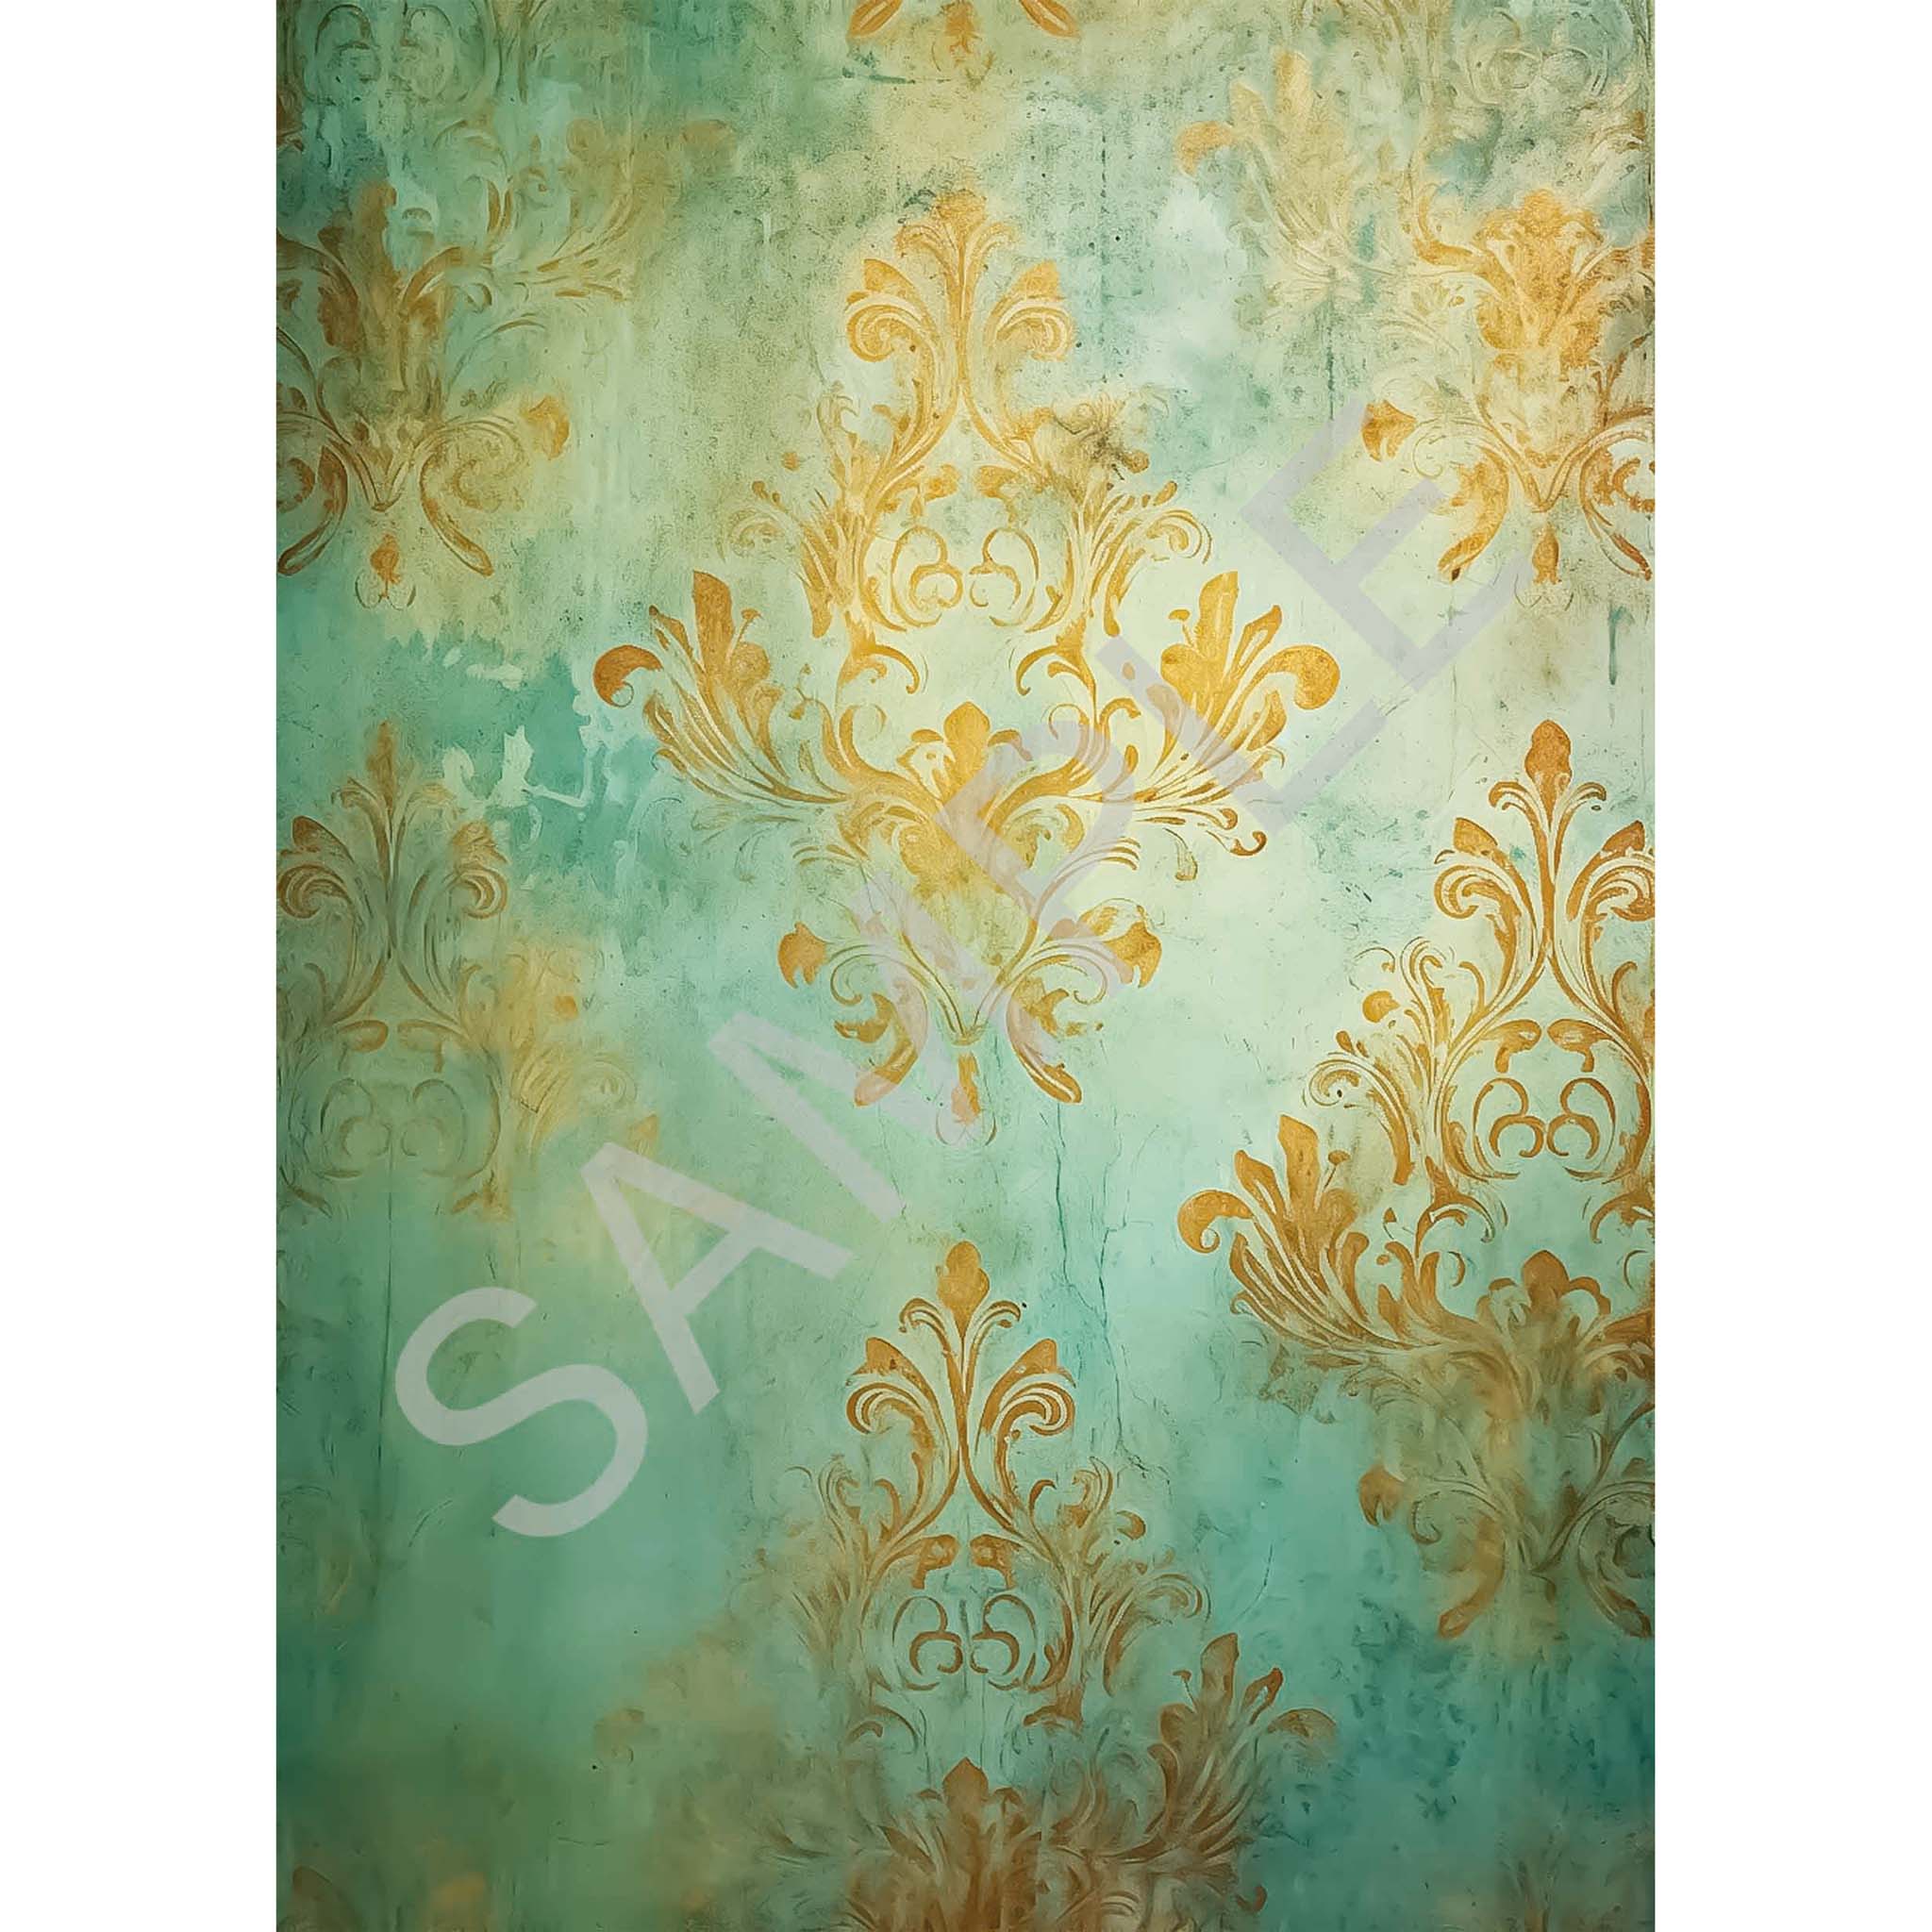 A4 rice paper design featuring a beautiful golden damask print on a faded blue background. White borders are on the sides.